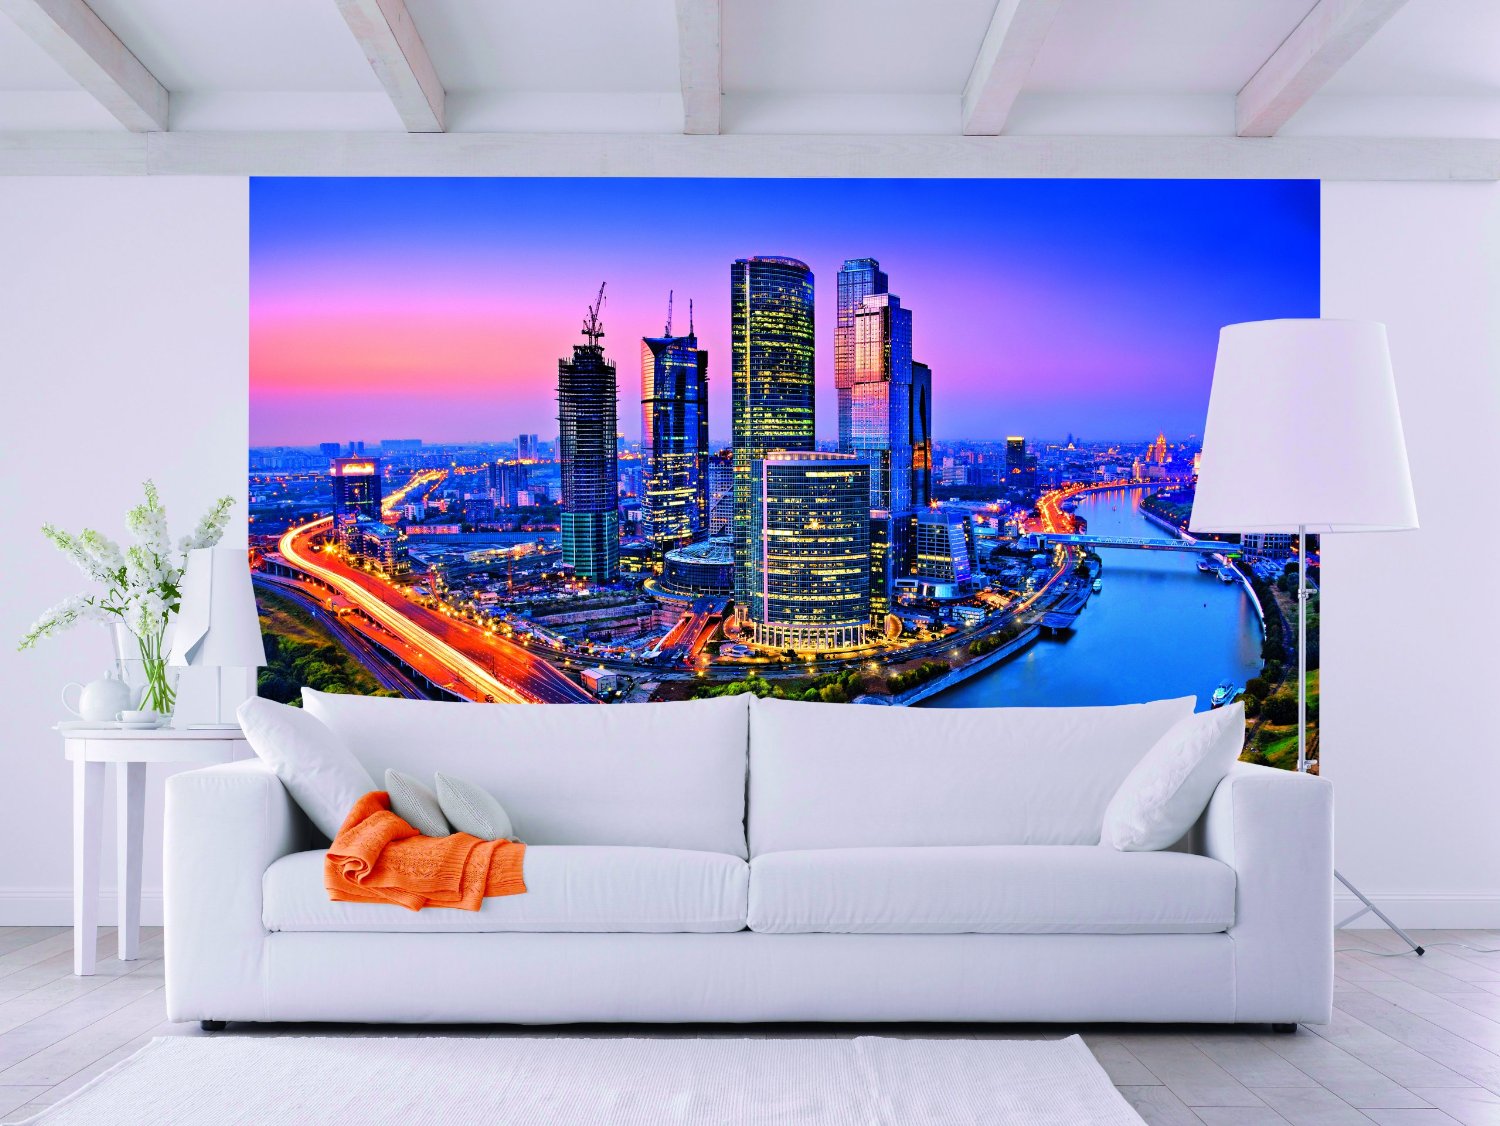 Moscow Twilight Wall Mural by Ideal Decor DM125